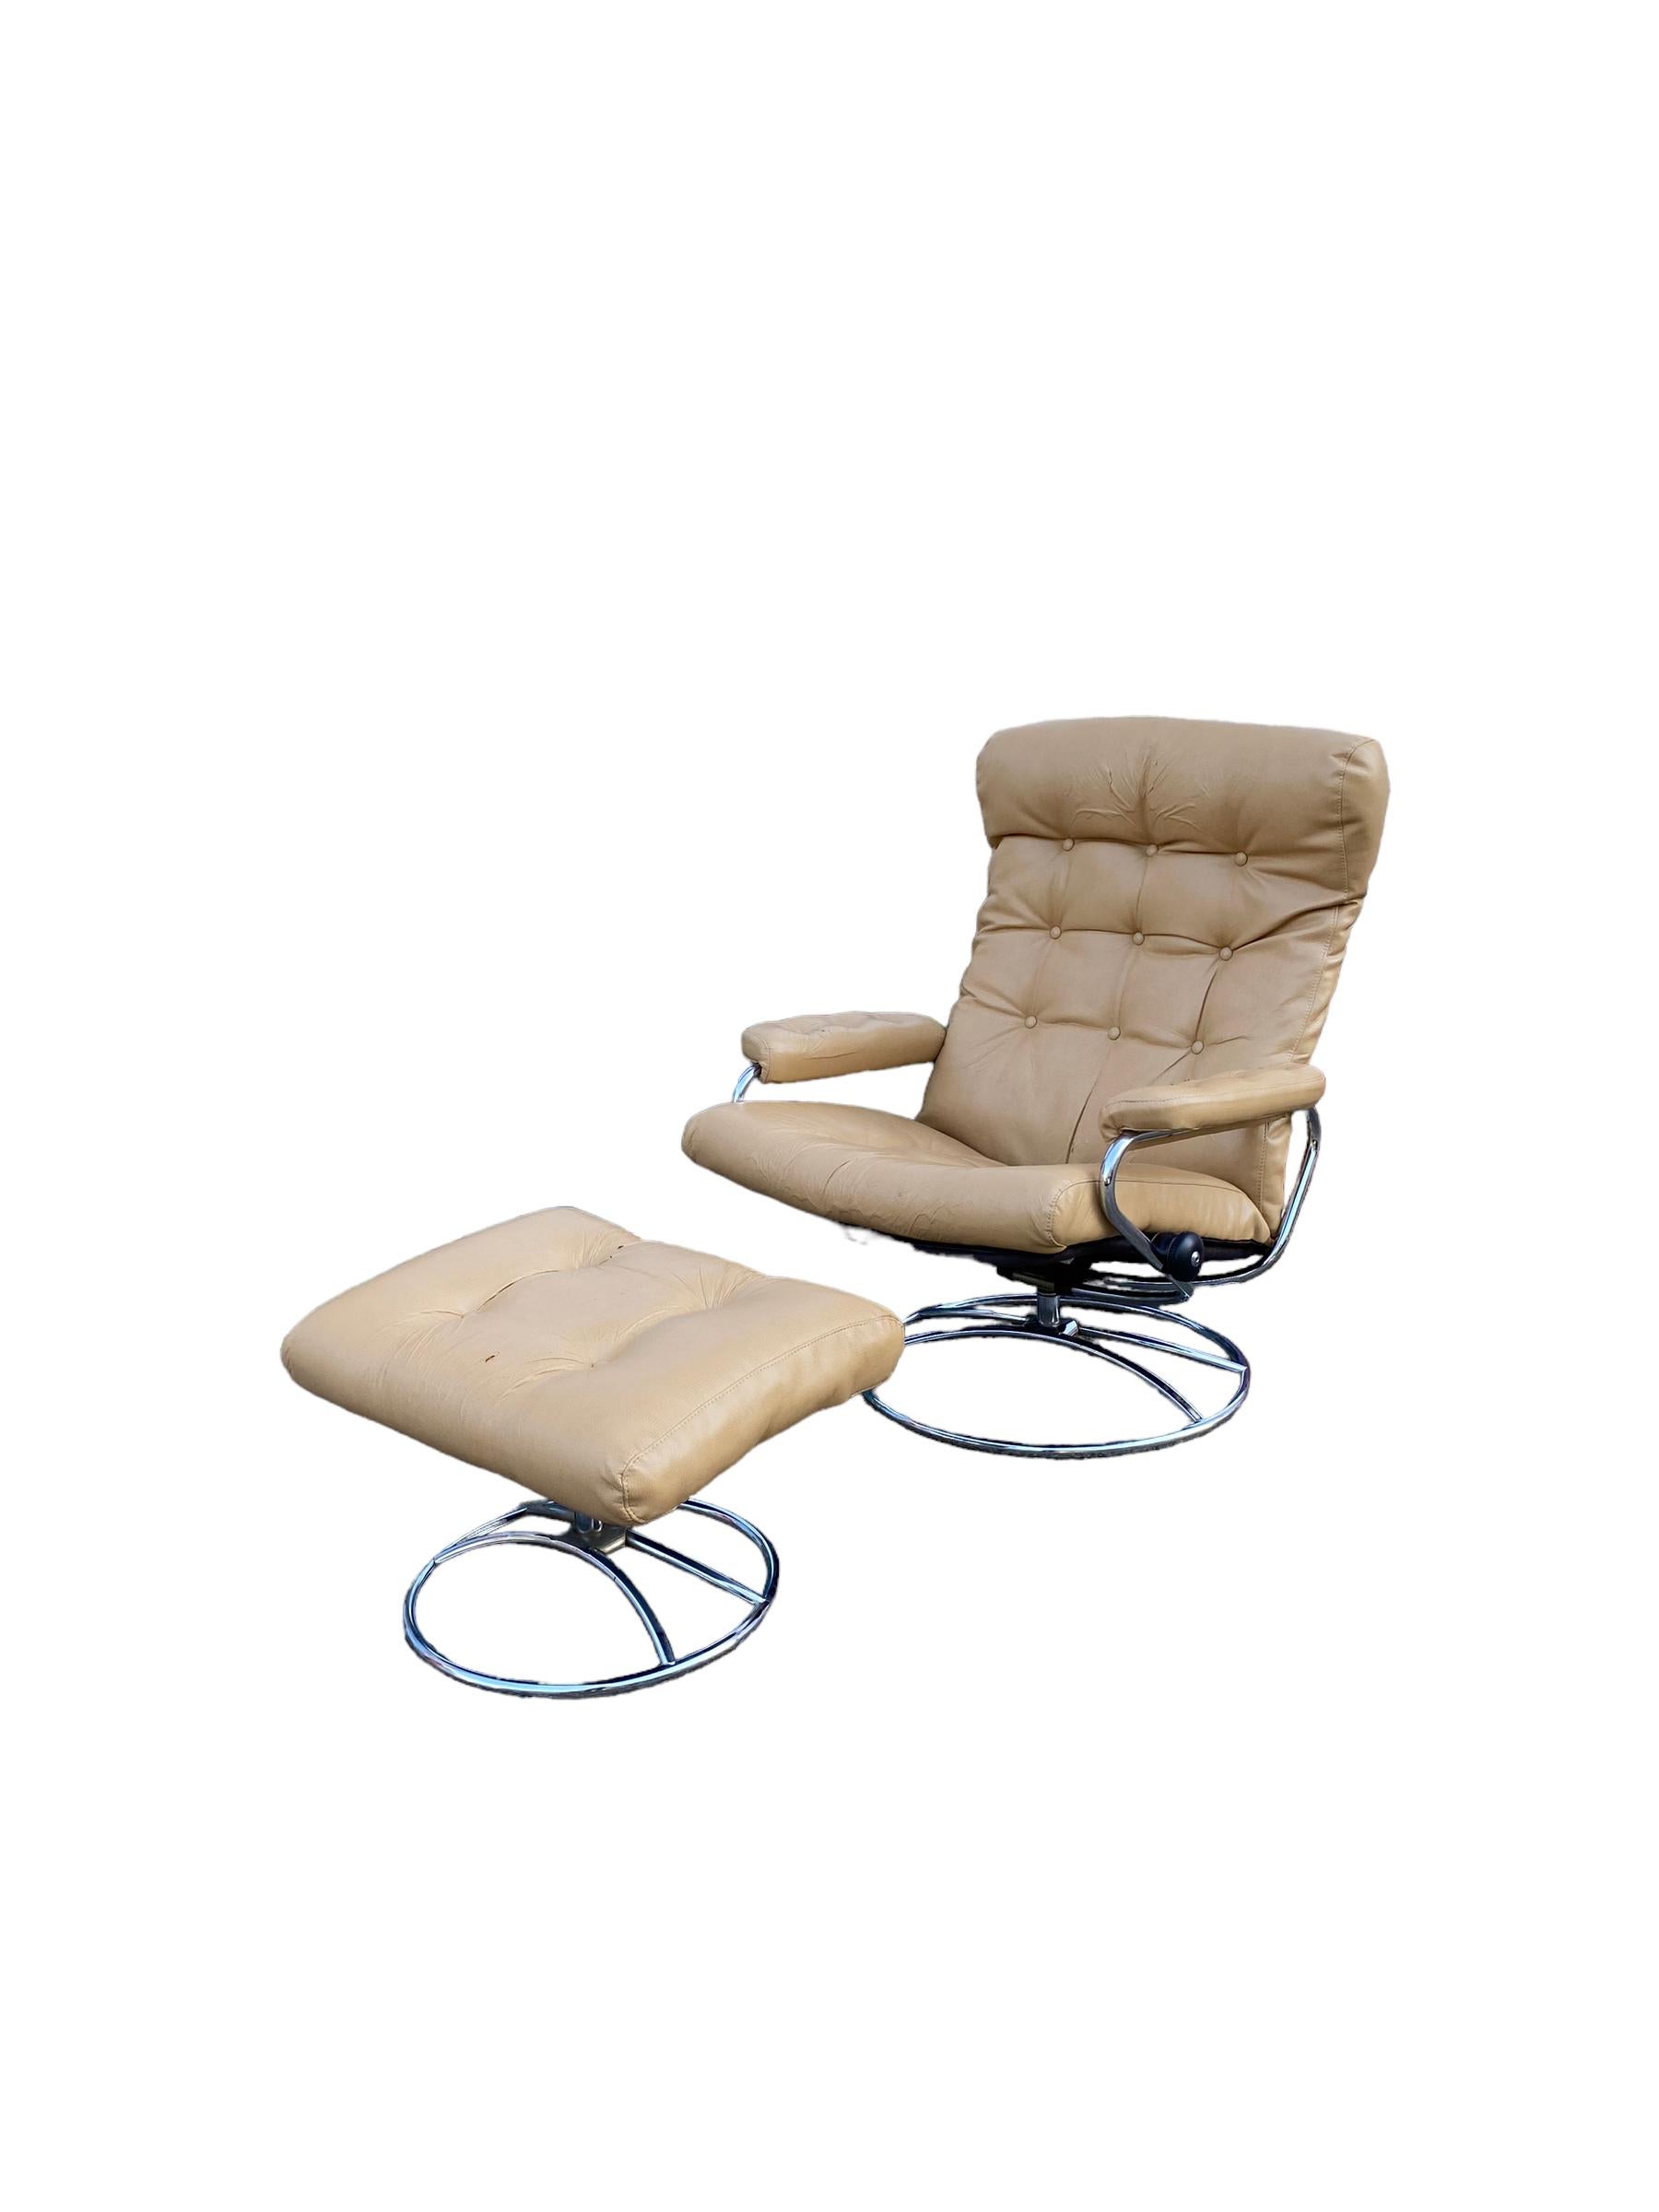 Ekornes Stressless reclining lounge chair and ottoman. Elegant mid century Scandinavian design with tubular bent chrome frame and cream bonded leather cushion. Lounge in comfort with this timeless design.
Sold in as is condition. Buyer might want to